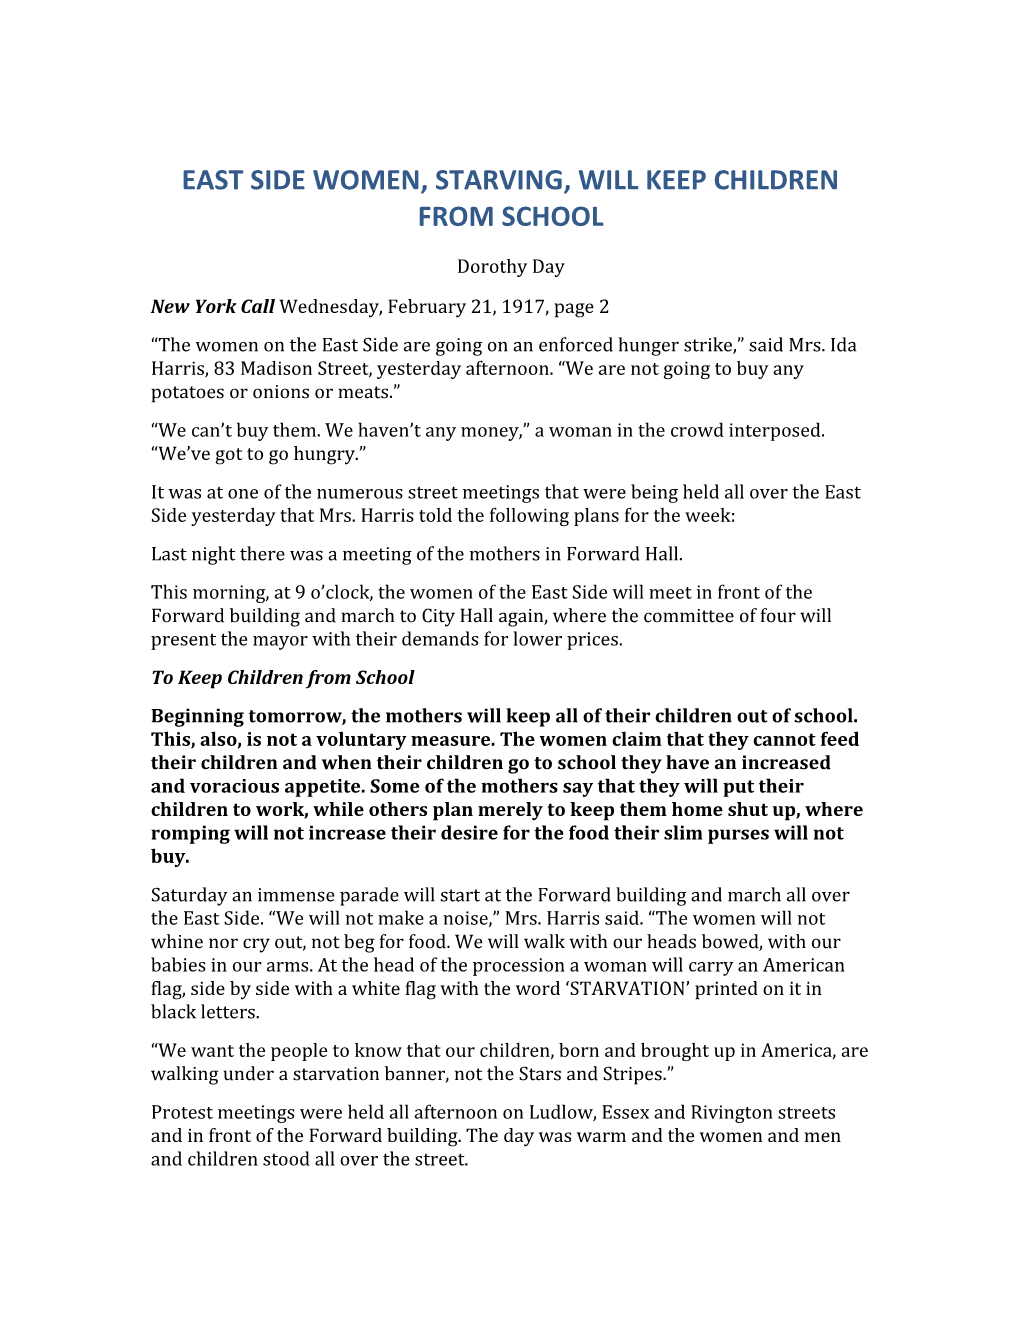 East Side Women, Starving, Will Keep Children from School